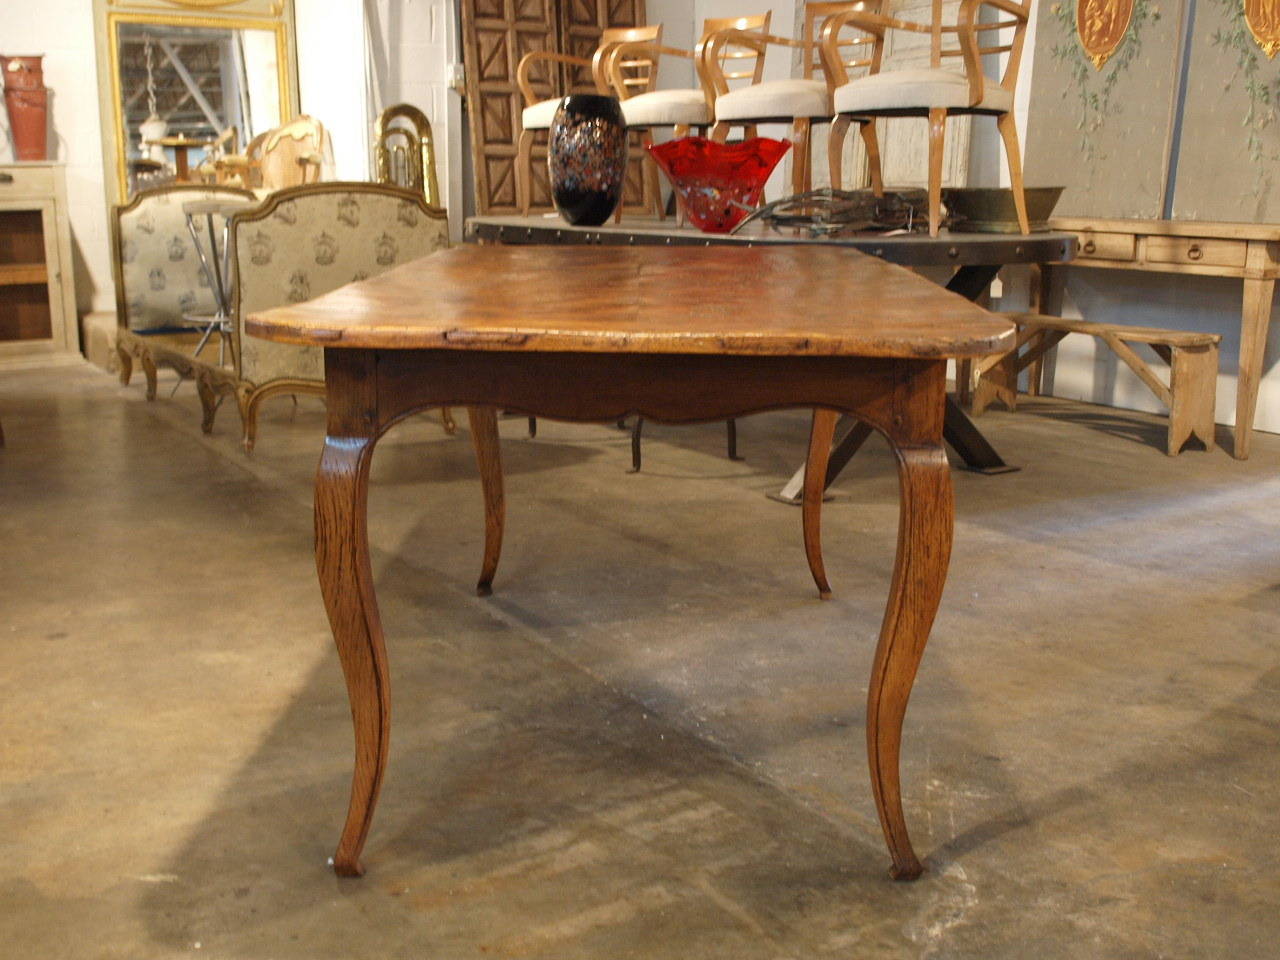 18th century dining table